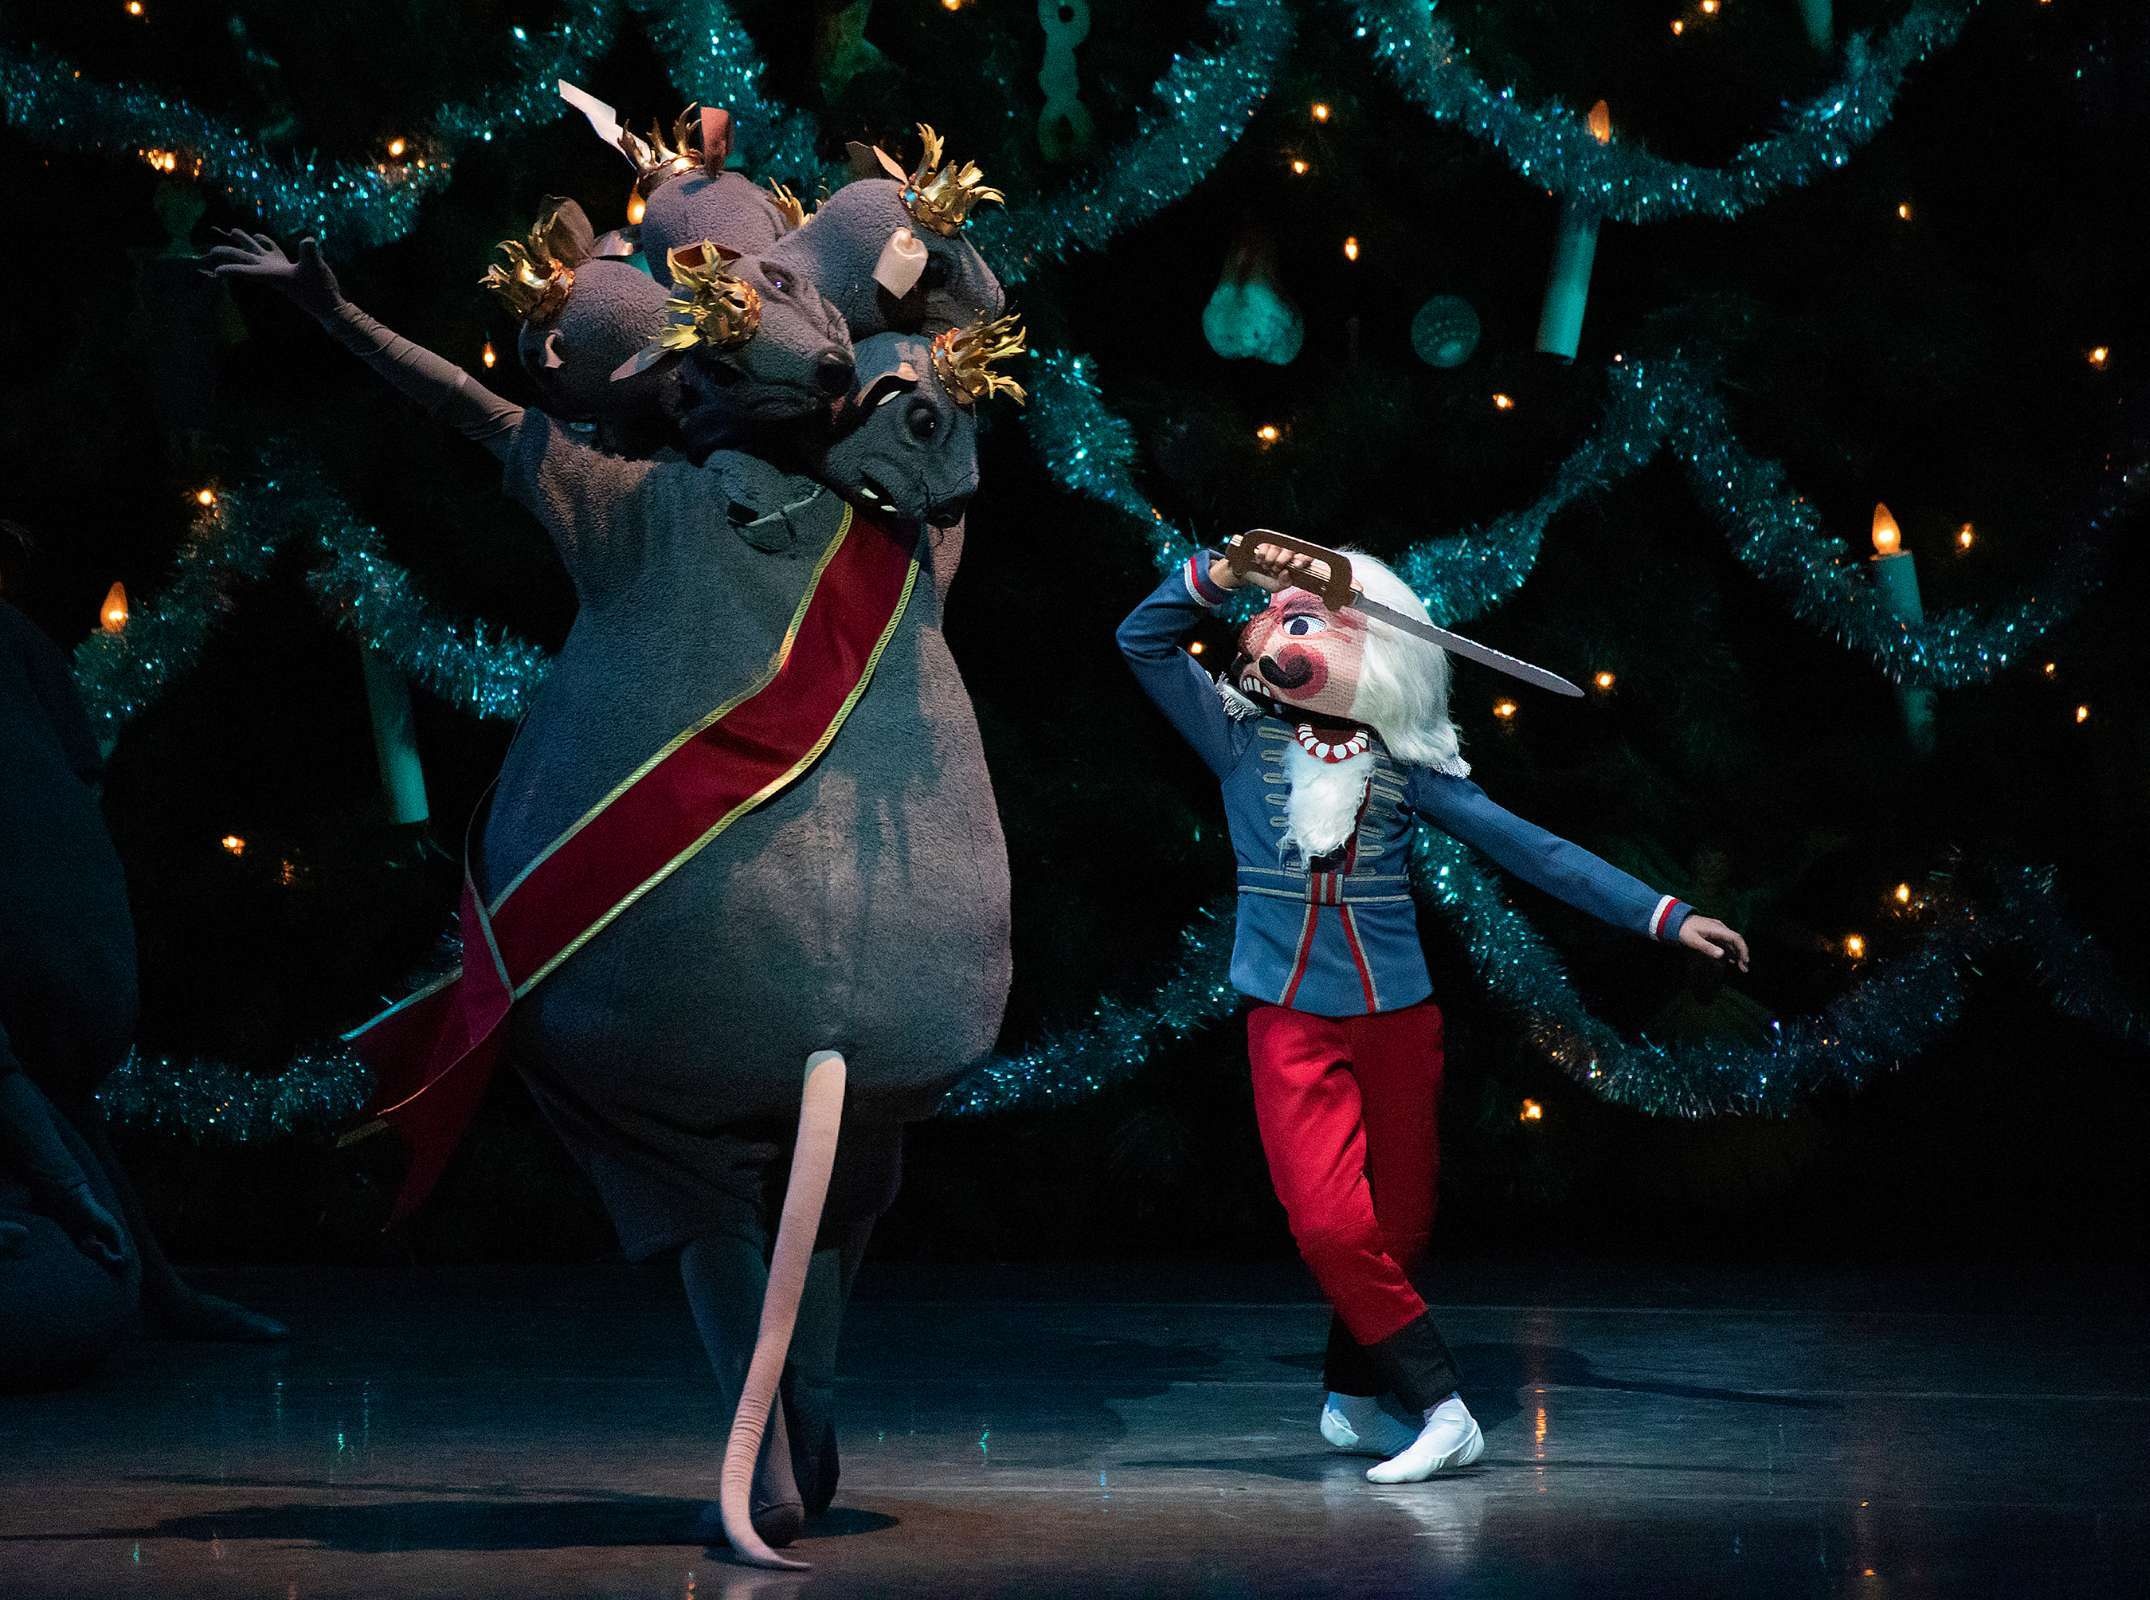 Nutcracker: George Balanchine's choreography, One of the most complex staged ballets in the company's active repertory. 2150x1600 HD Wallpaper.